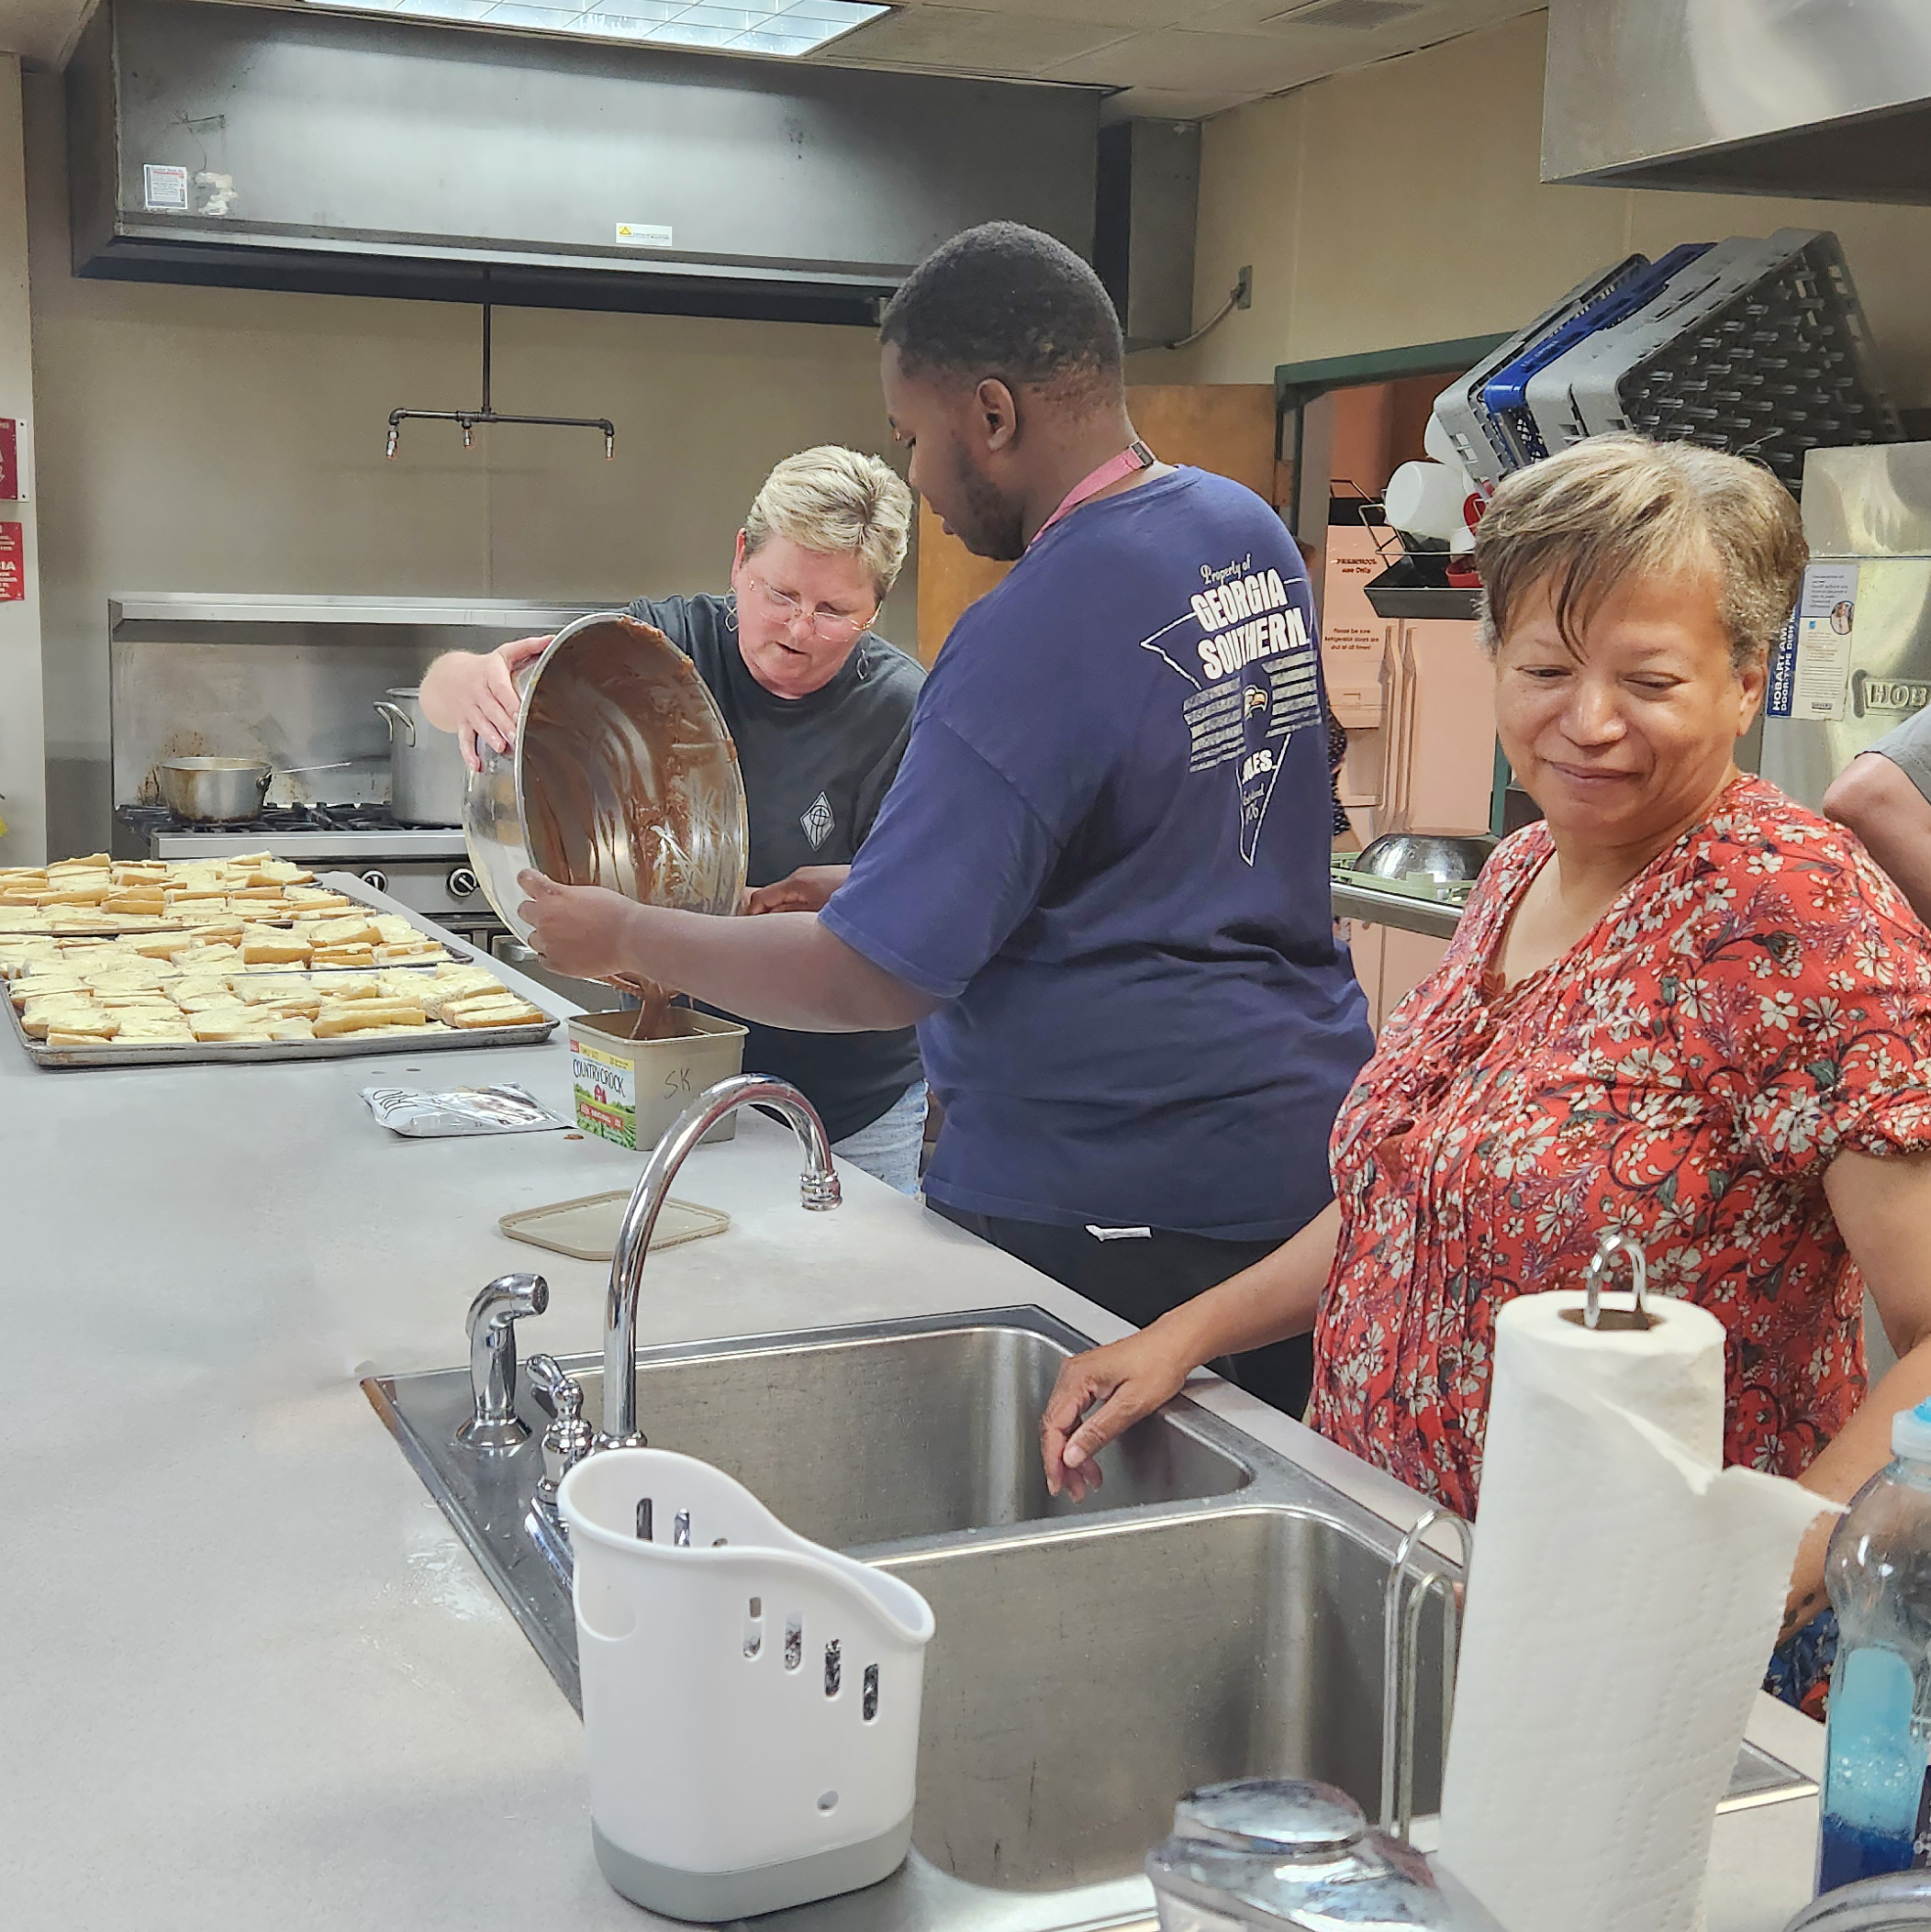 Volunteers at the soup kitchen